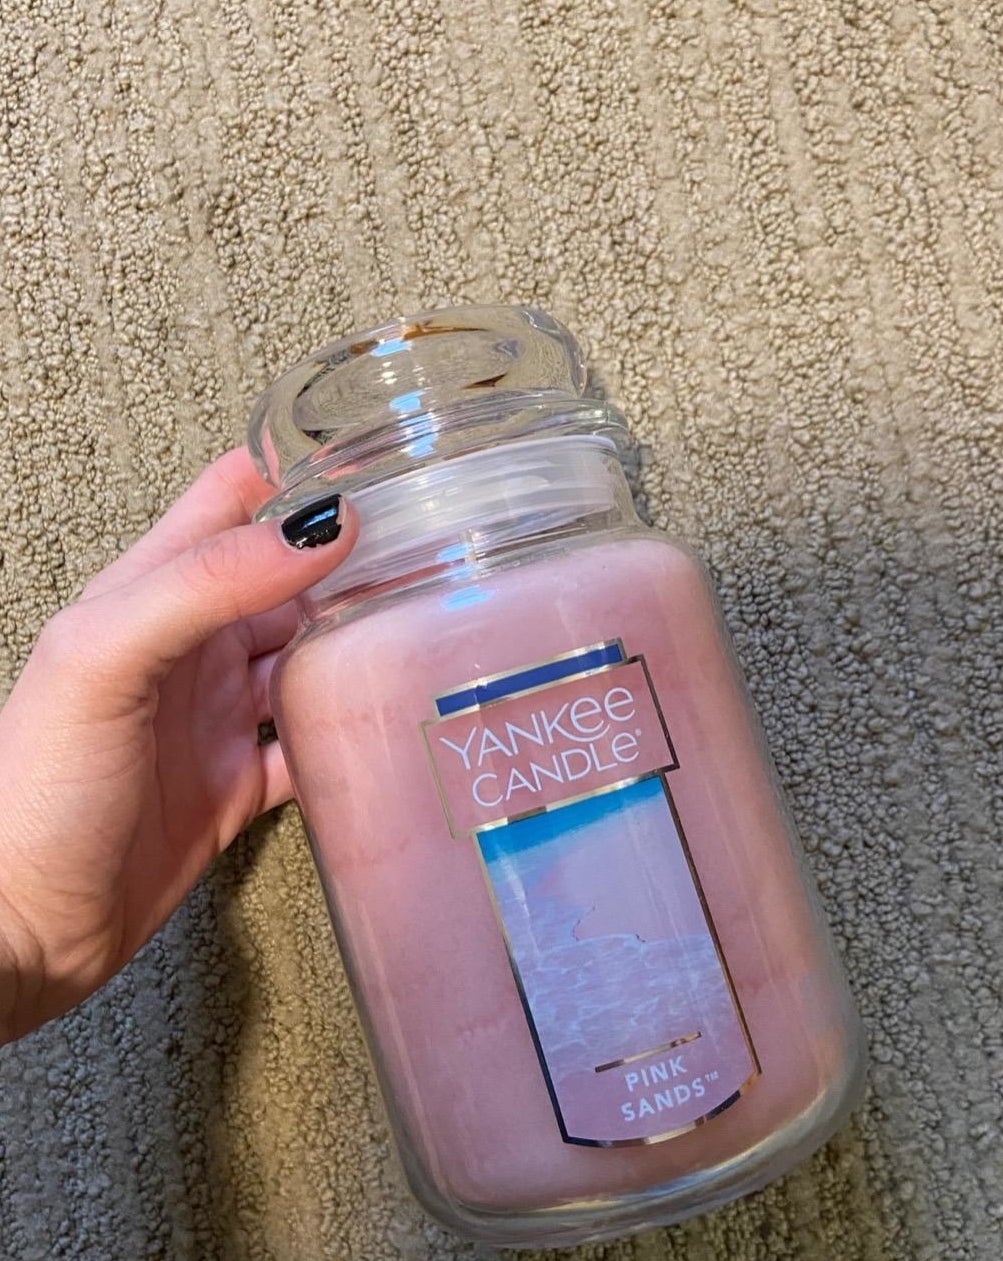 person holding the pink sands yankee candle